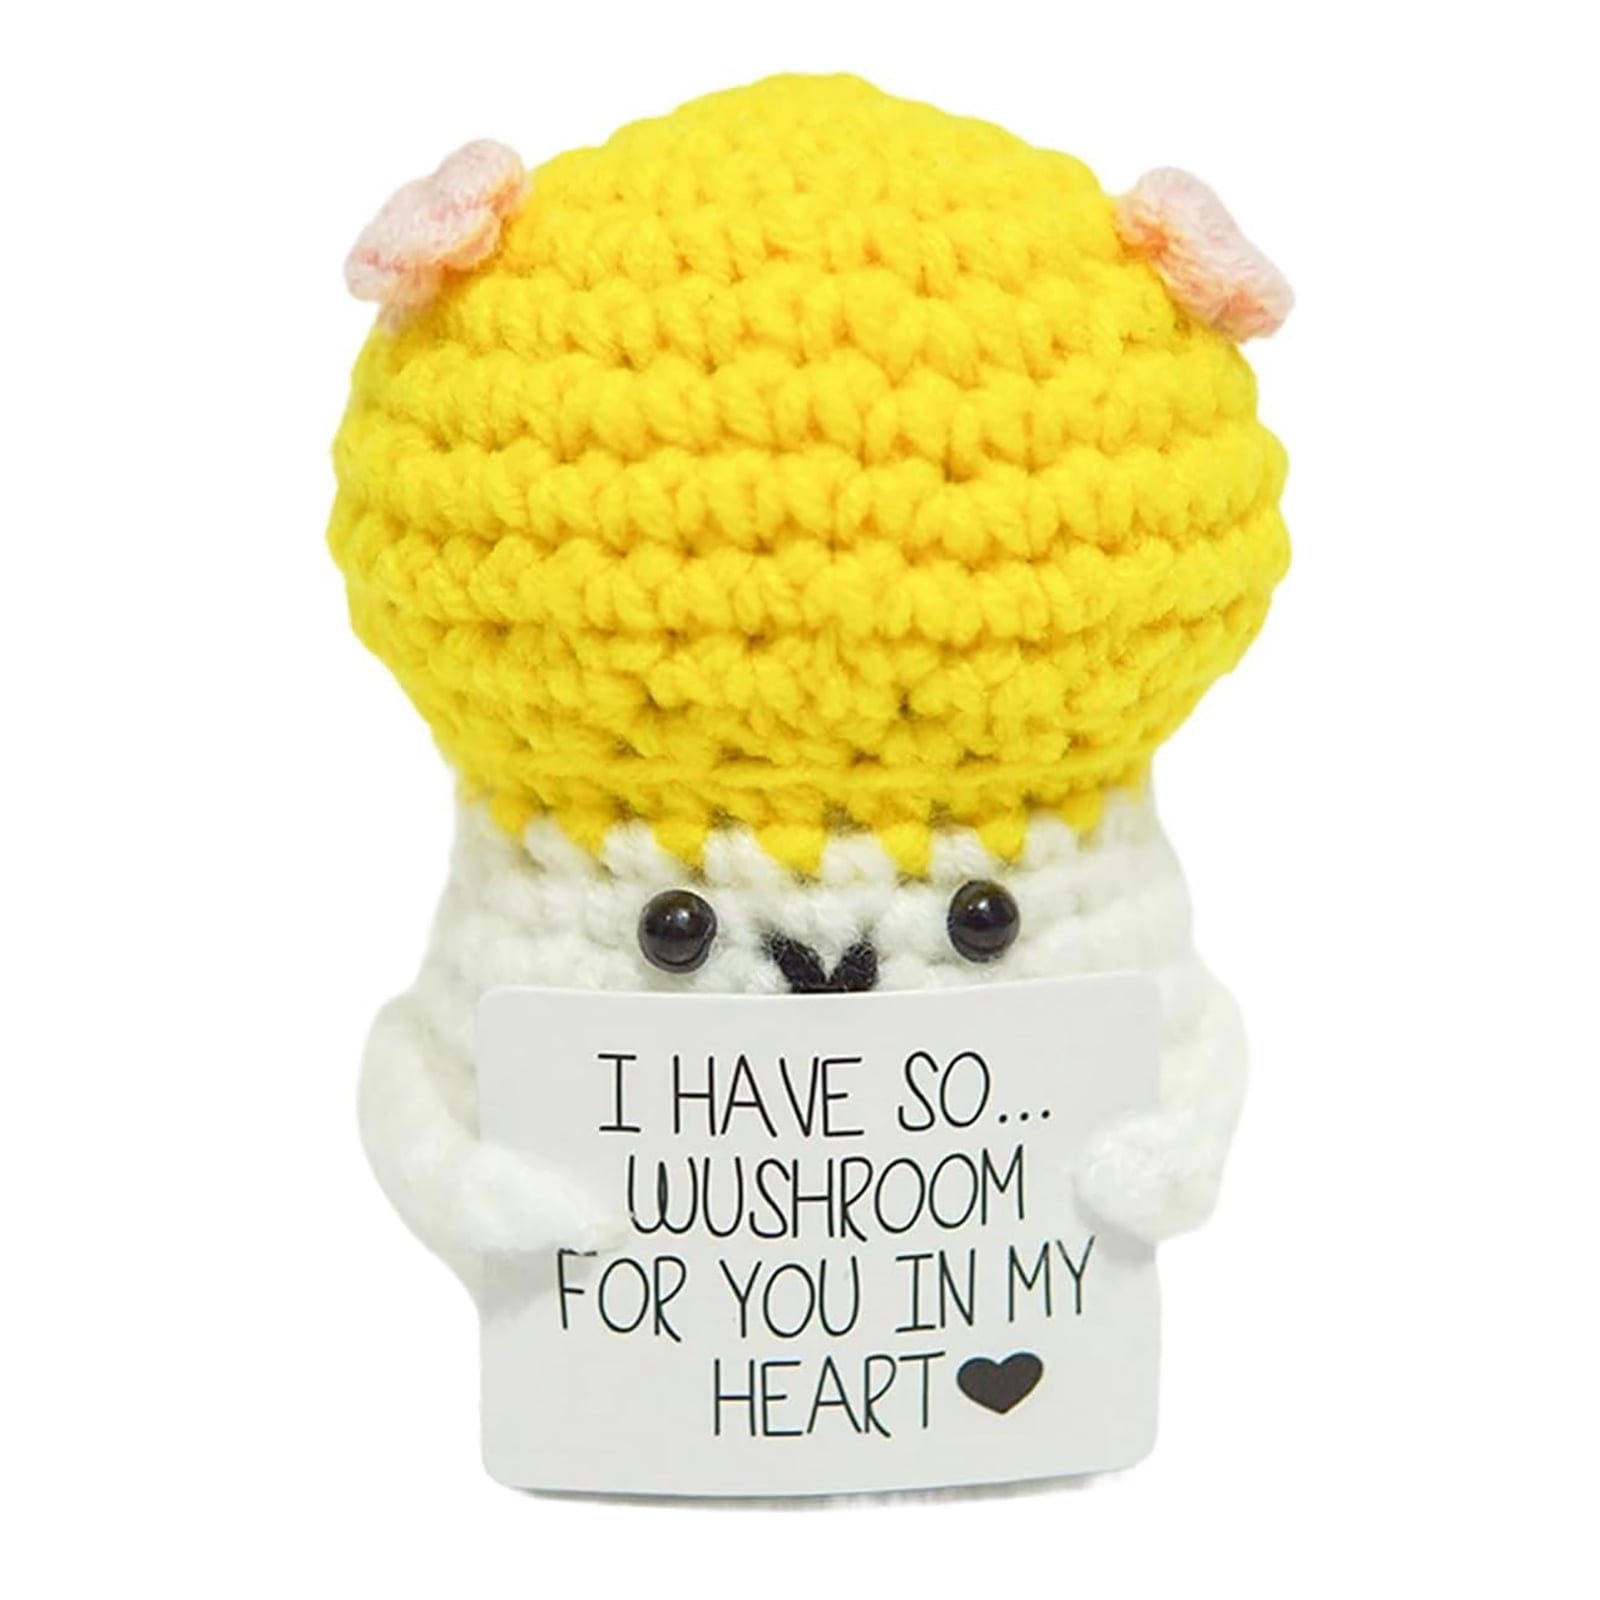 StarryBaby Funny Positive Potato Cute Wool Knitting Doll with Positive Card  Affirmation Cards Funny Knitted Potato Doll Xmas Desk Accessor